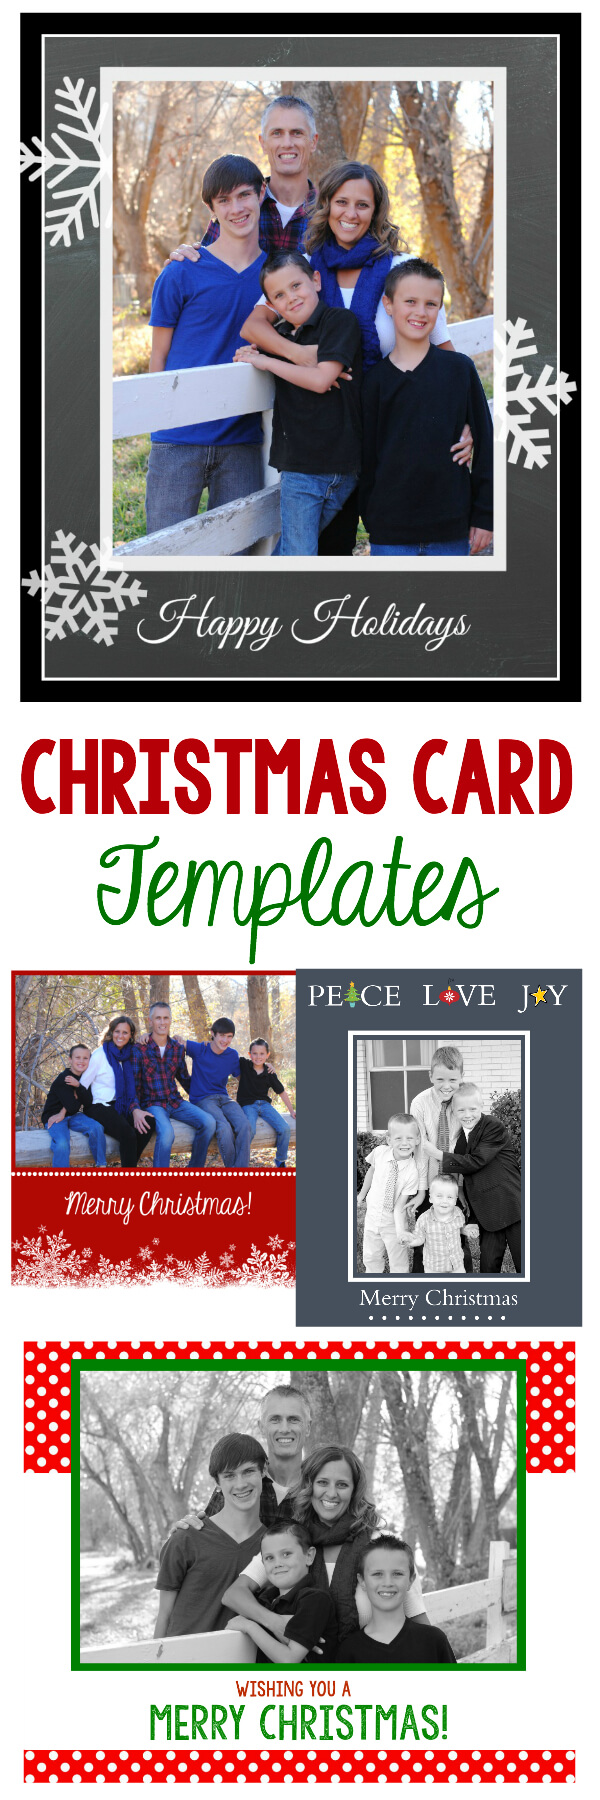 Free Christmas Card Templates – Crazy Little Projects Pertaining To Free Christmas Card Templates For Photographers